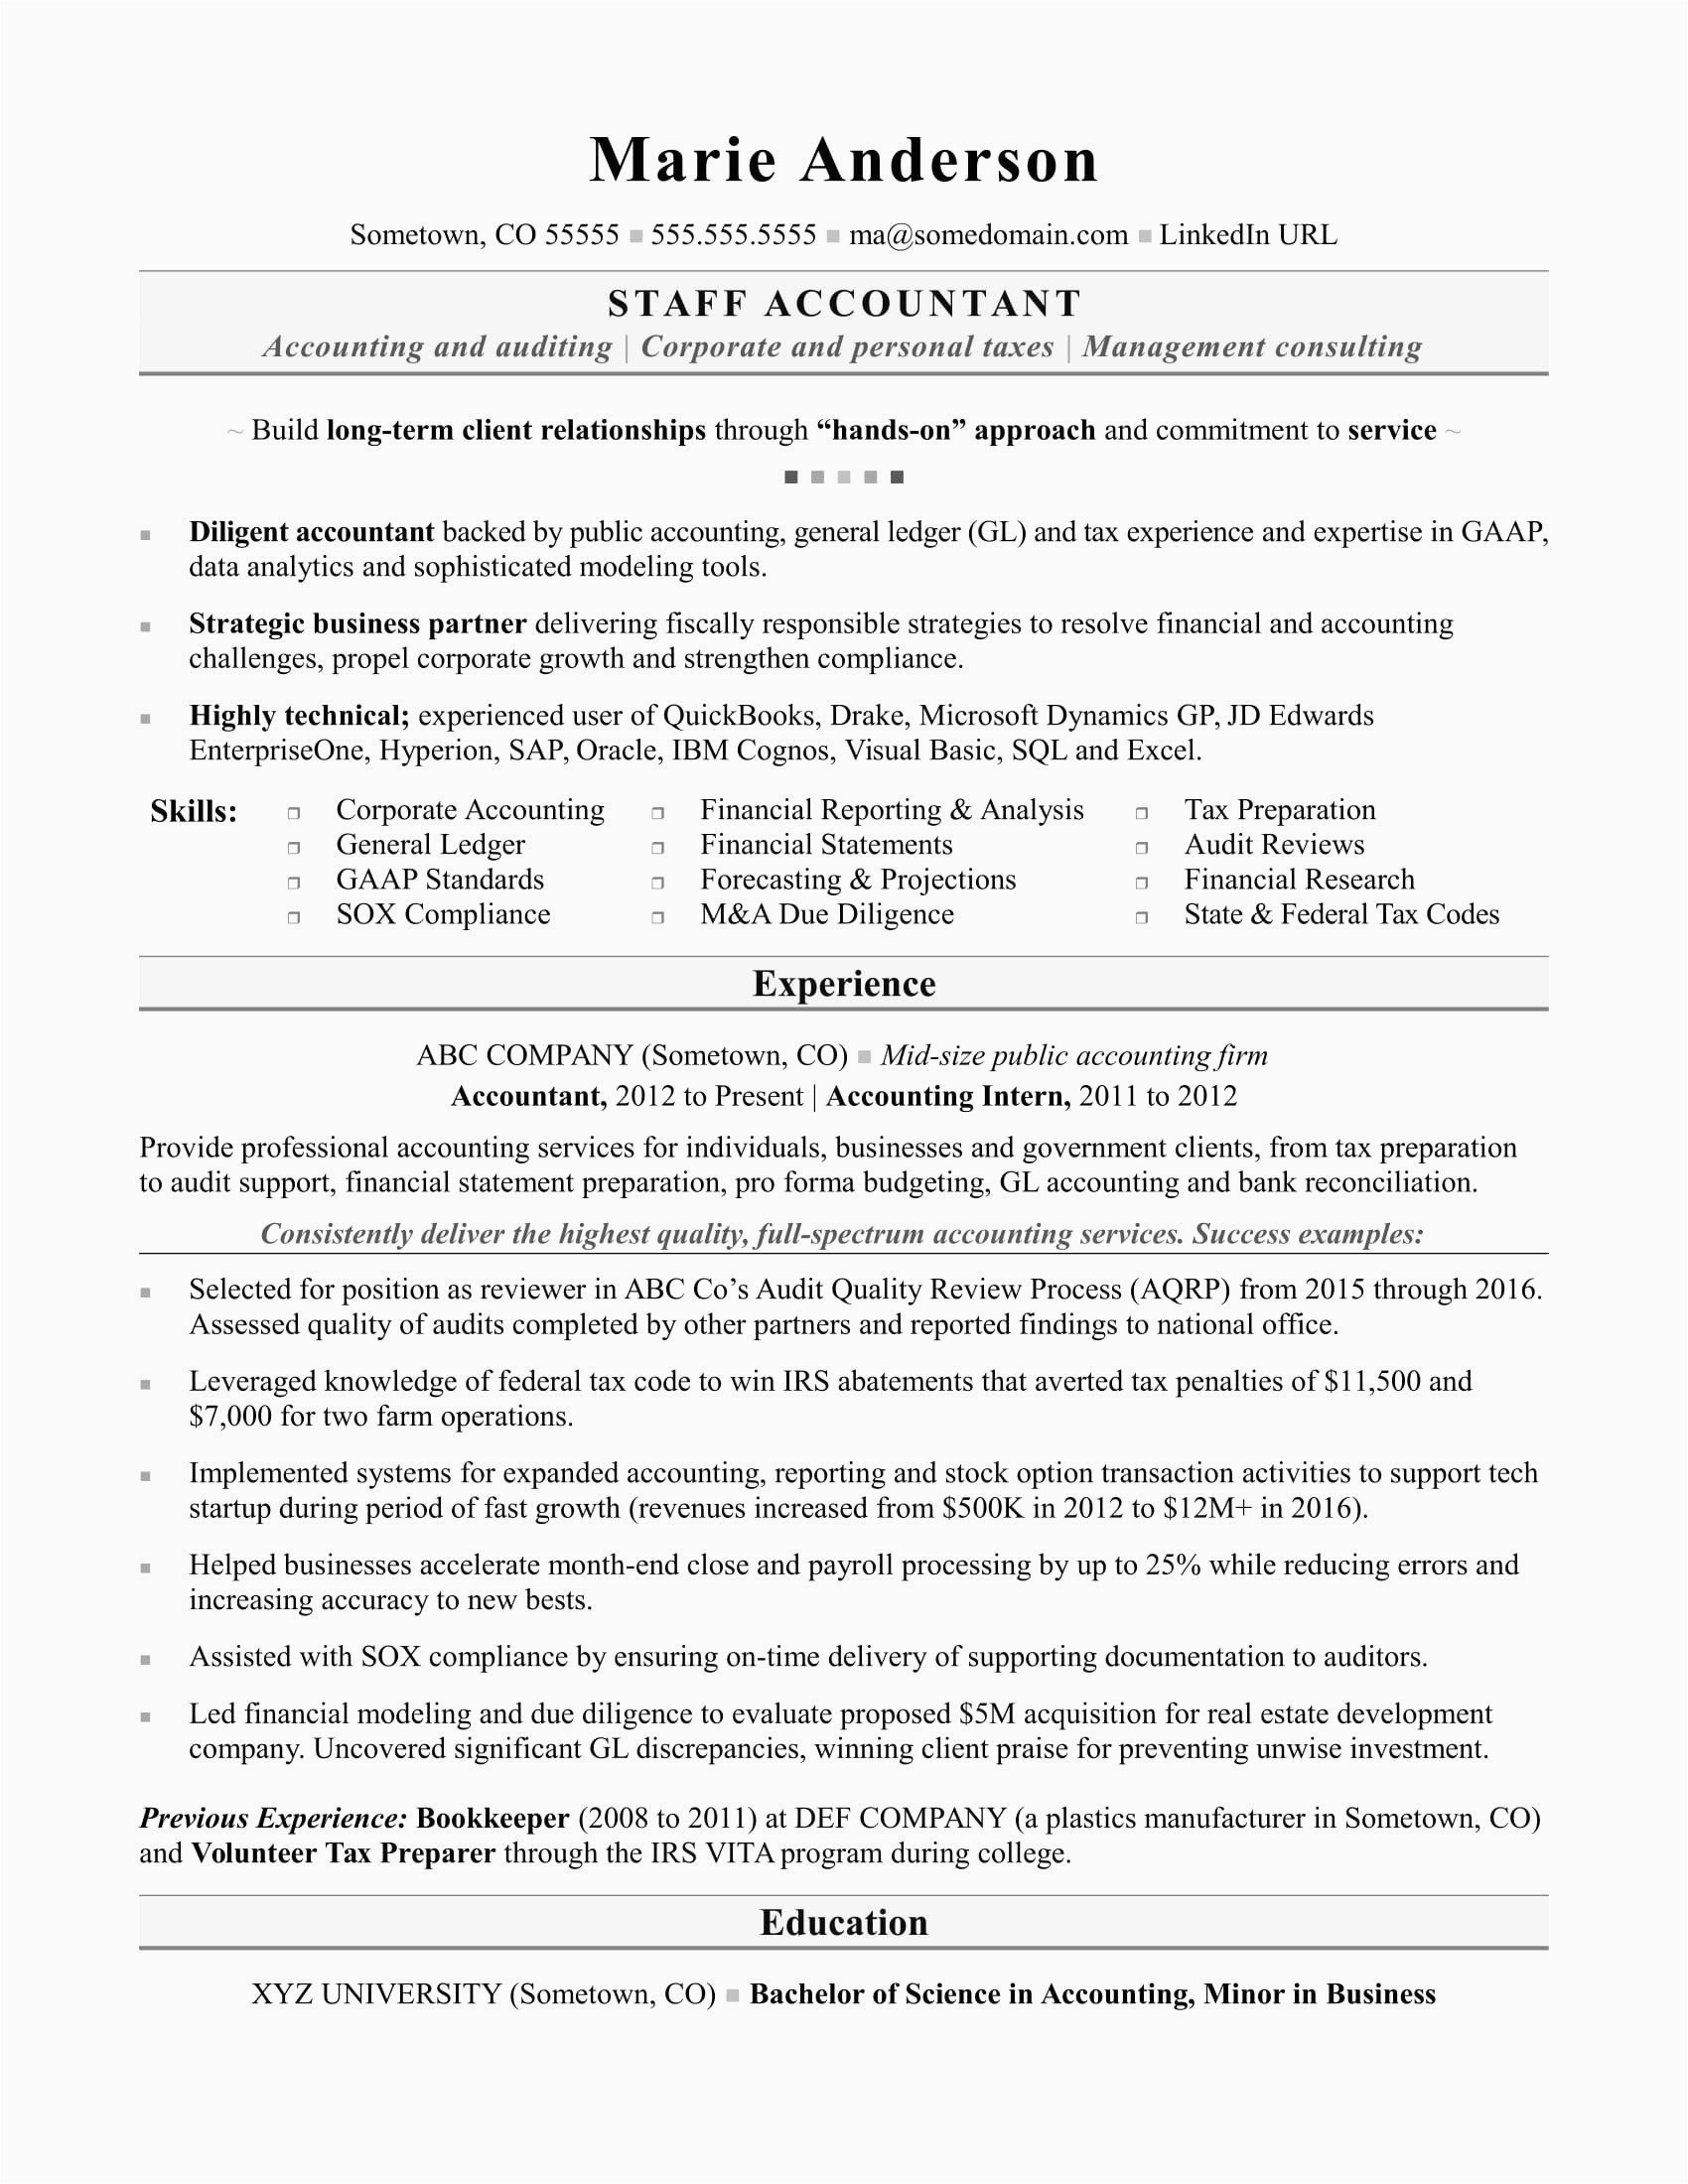 Sample Of Resume Objective for Accountant Staff Accountant Resume Examples Fresh Accounting Resume Sample In 2020